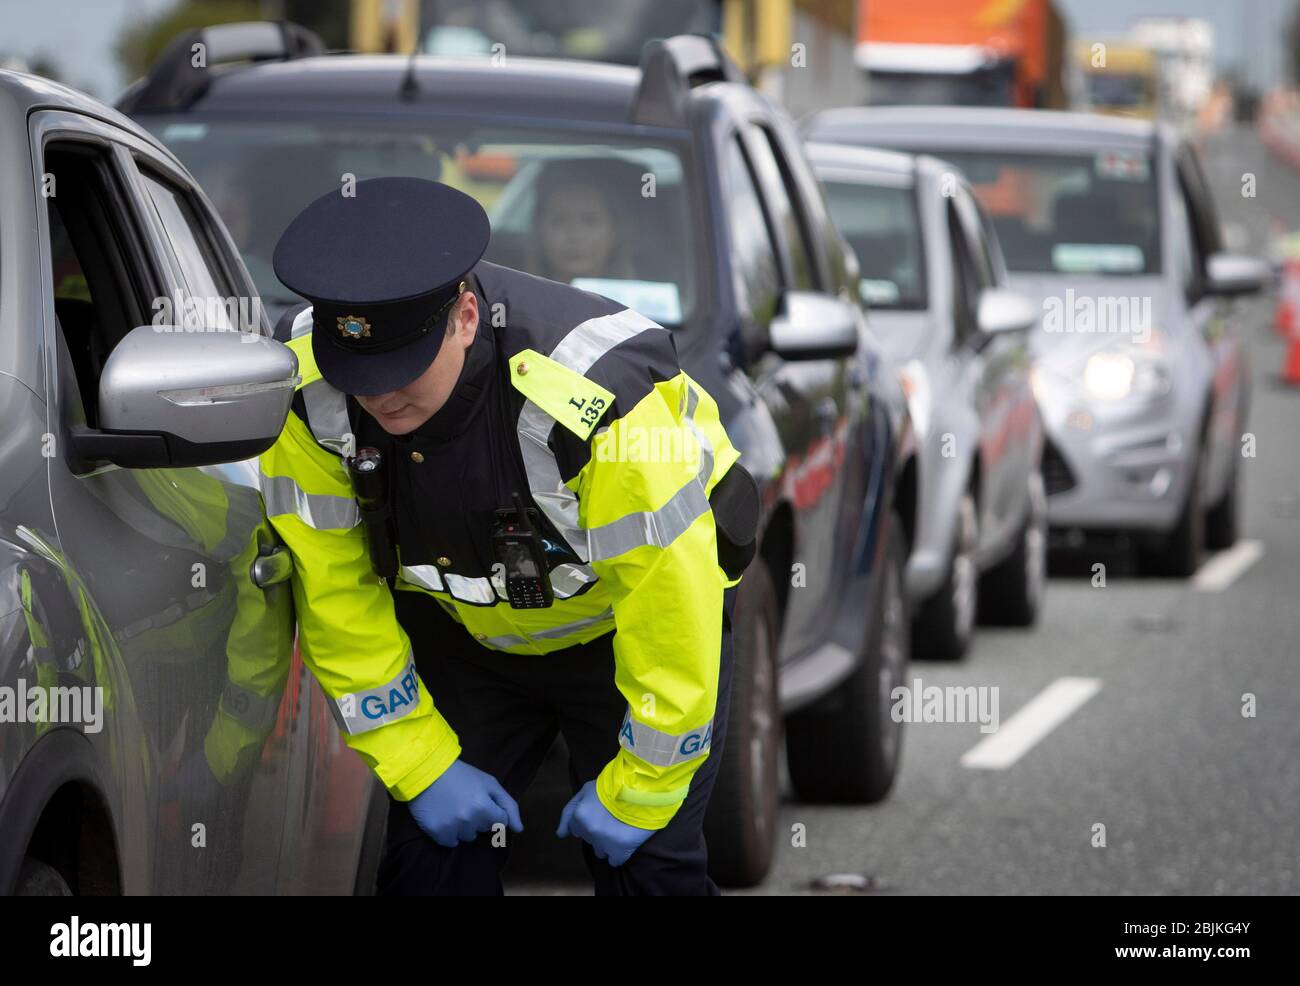 Dublin, Ireland - April 29, 2020: Garda Covid-19 checkpoint on the N7 motorway outside the city. Stock Photo